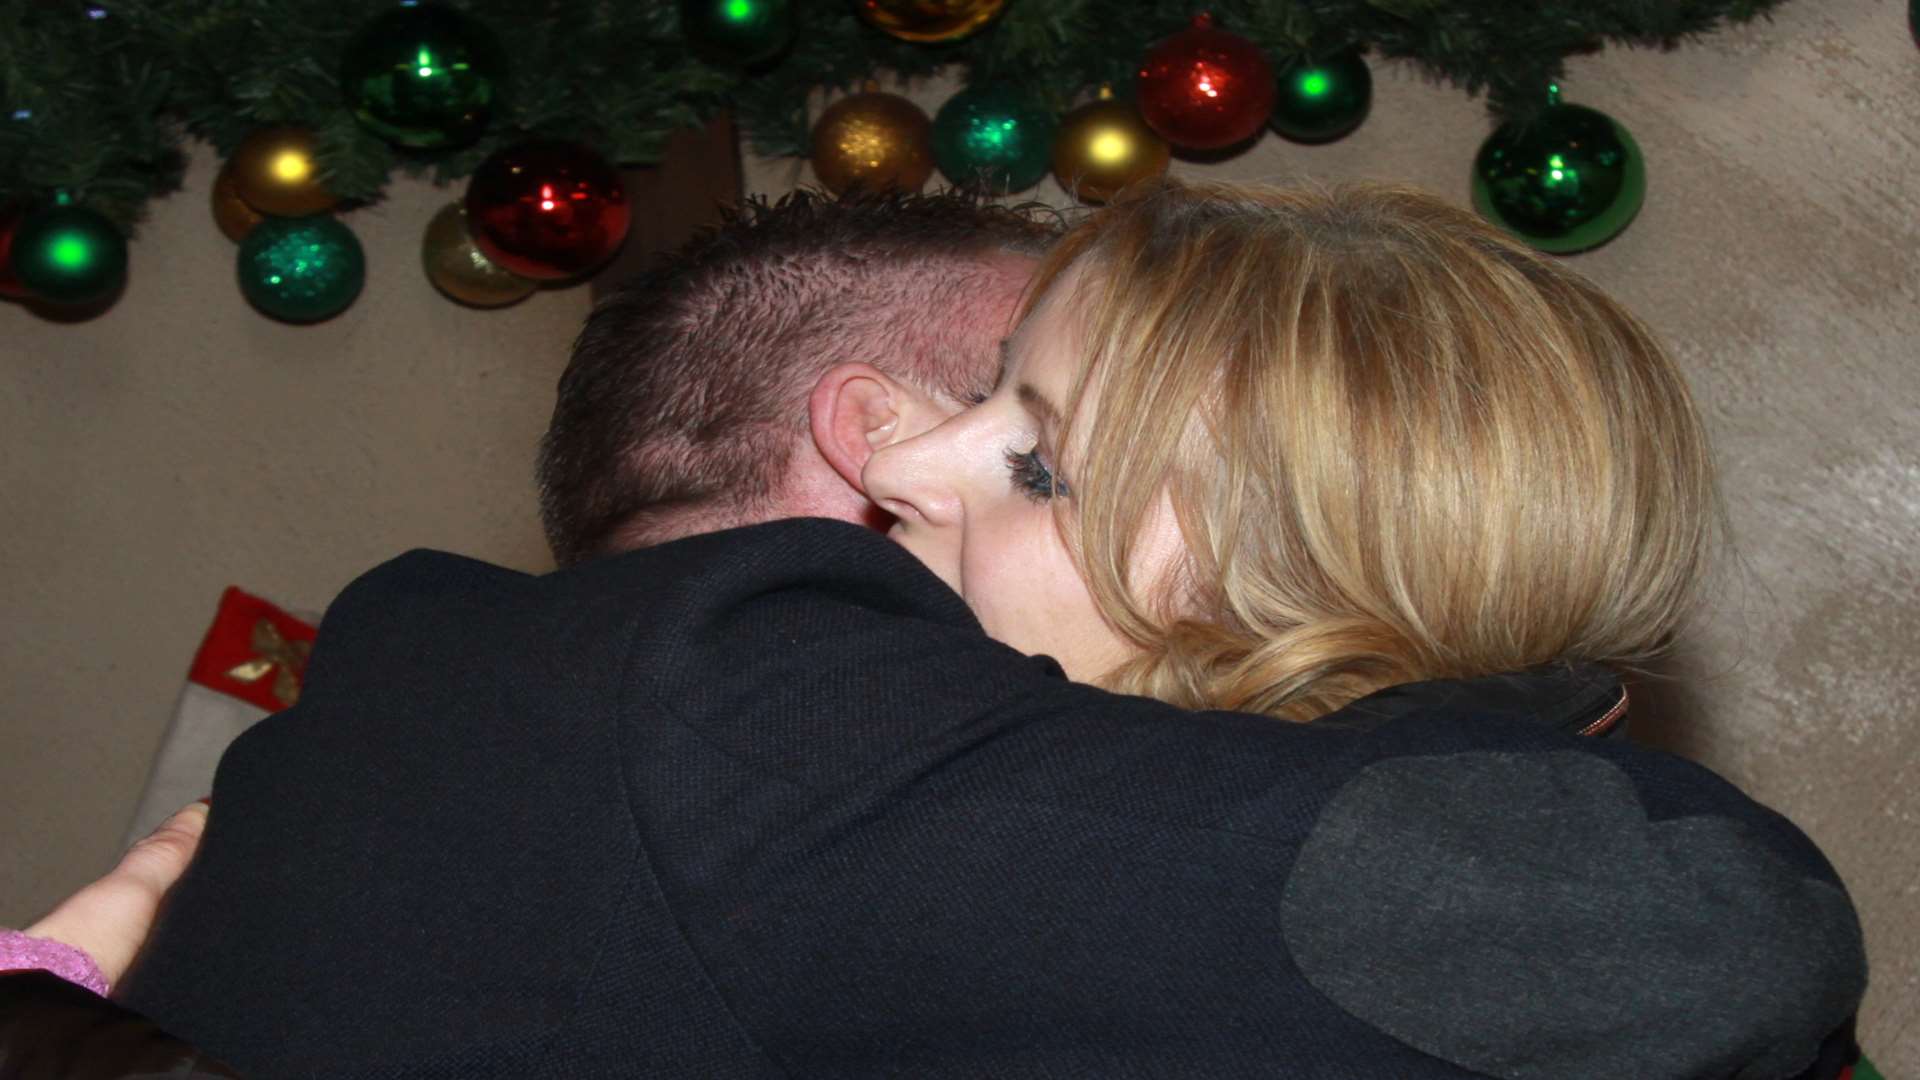 Graham Jones and Fiona Robertson hug after his marriage proposal in Santa’s Grotto.Photograph courtesy of www.Photo-Team.co.uk